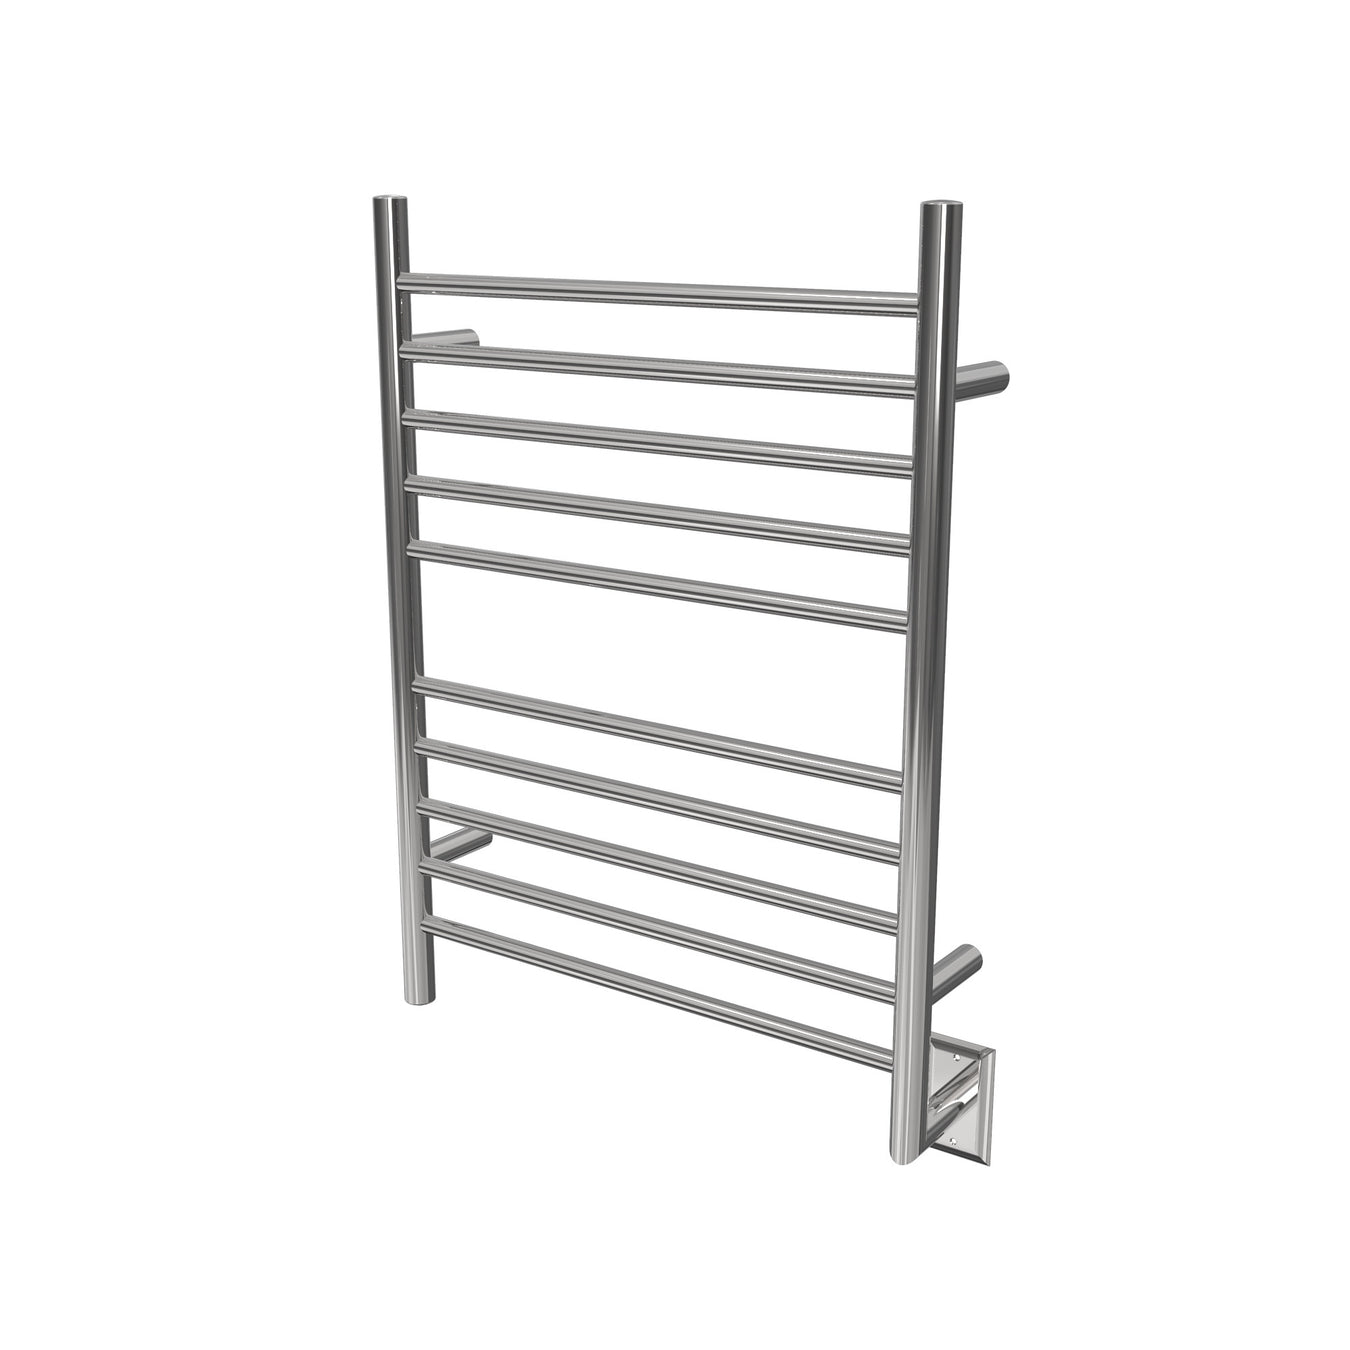 Amba Products Radiant Collection Hardwired Straight Towel Warmers